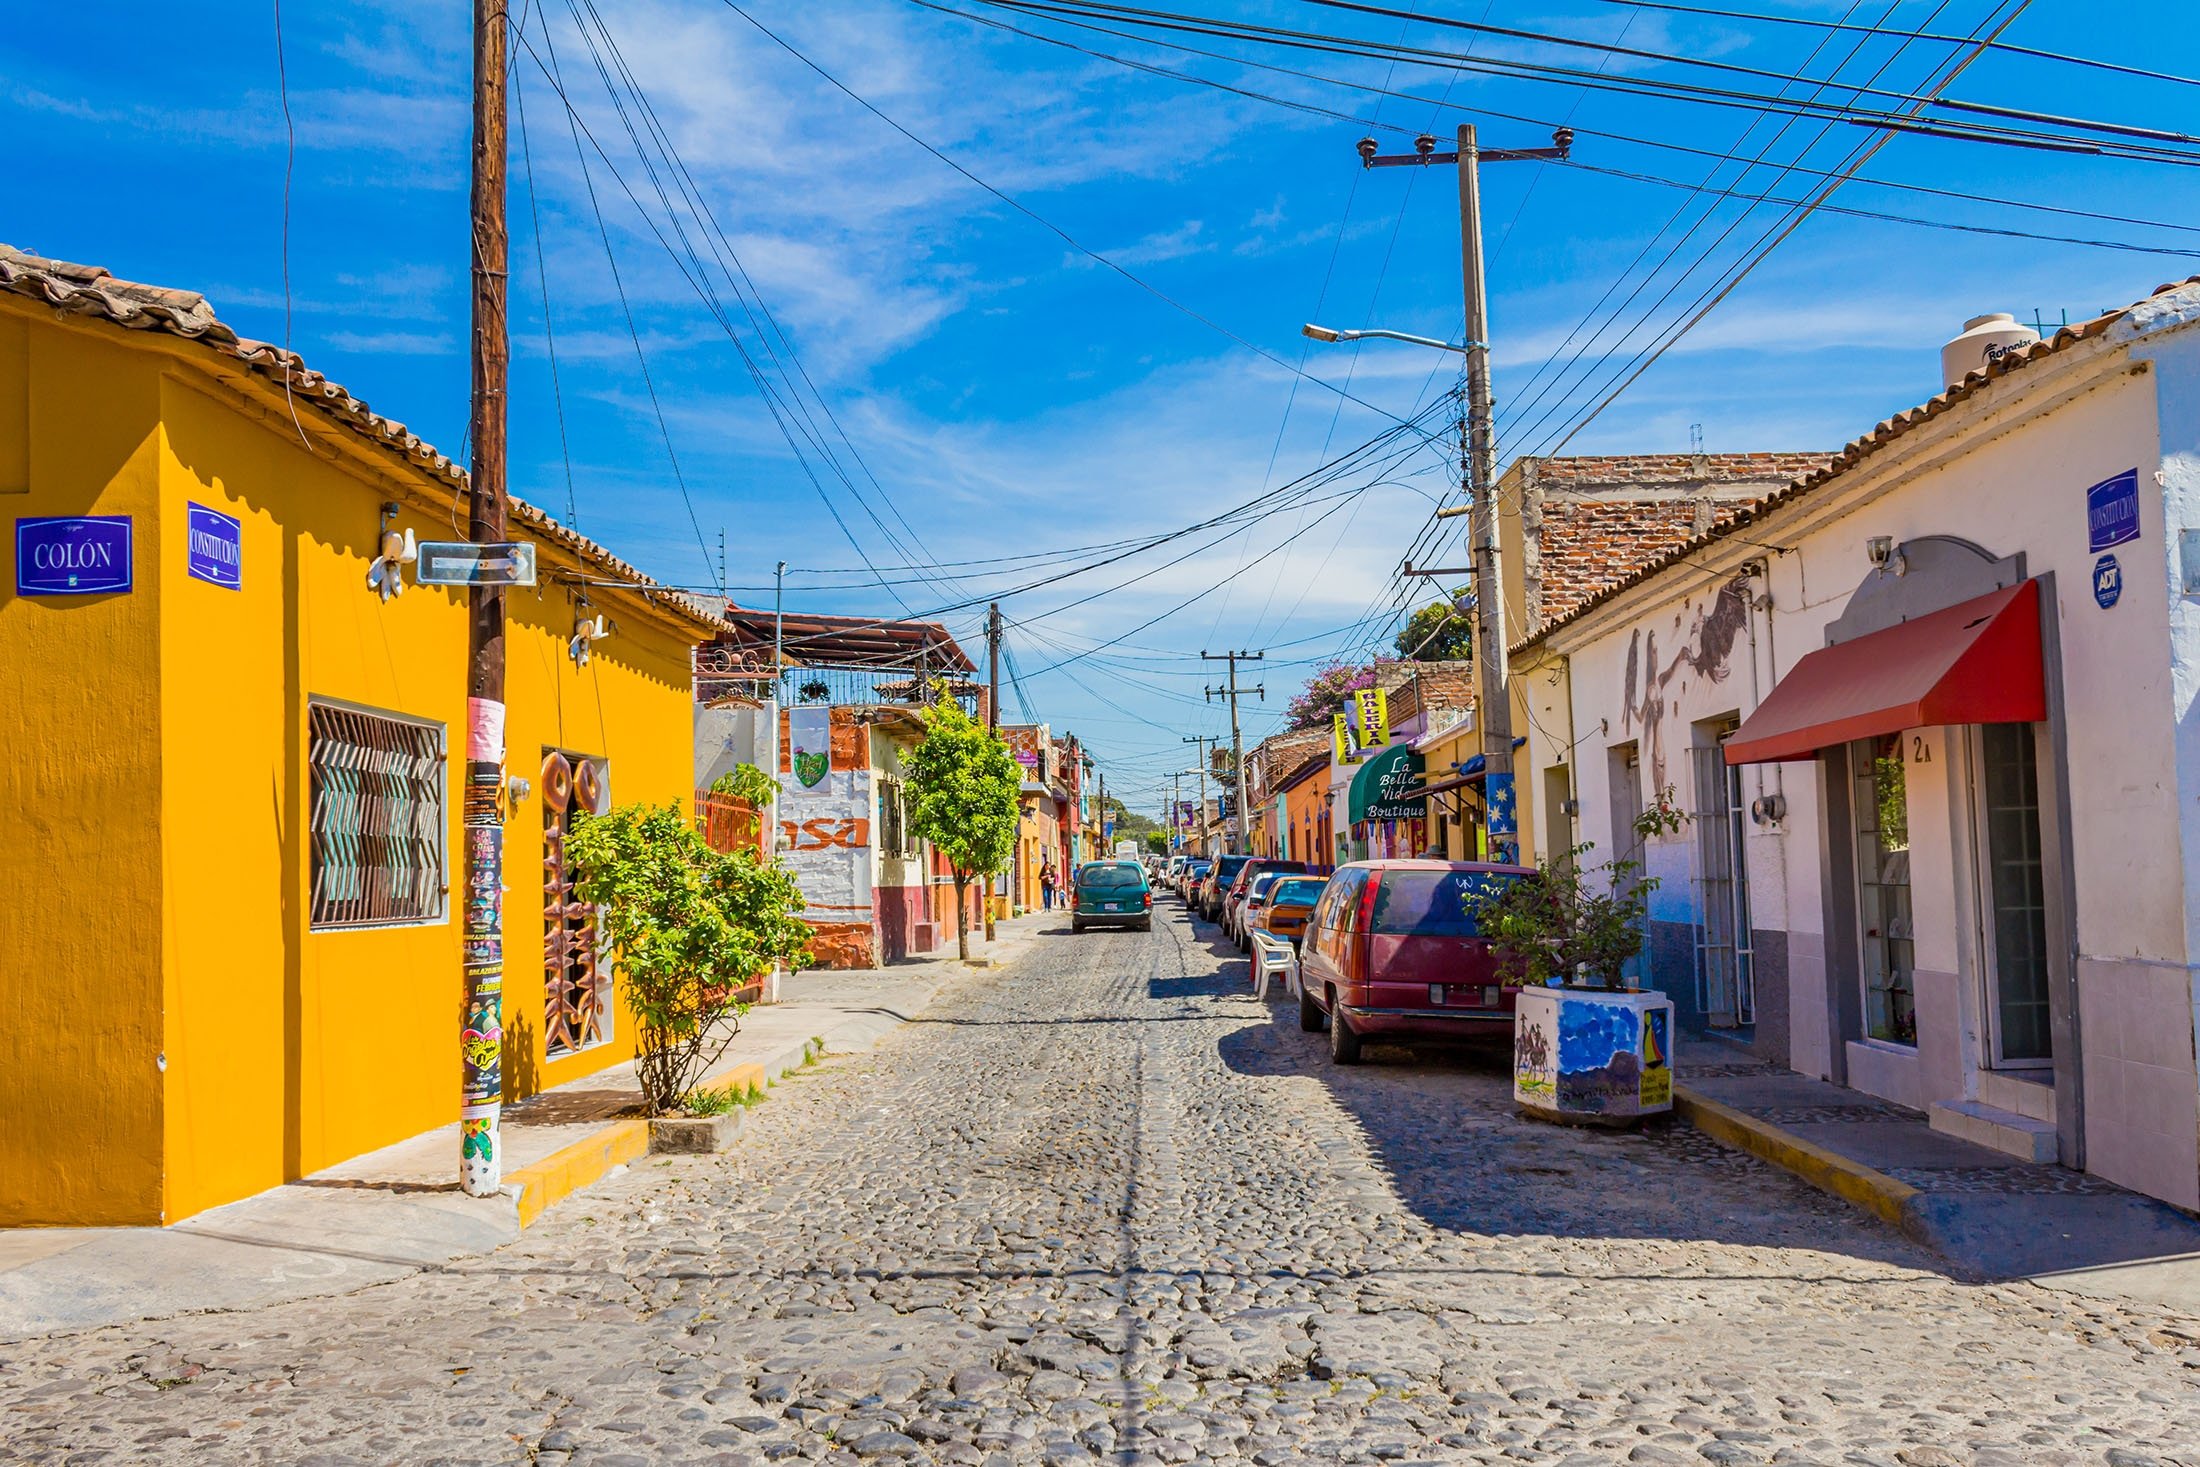 Sun shines upon a picturesque cobblestone street with brightly colored houses and shops, in Ajijic, Jalisco, Mexico, Feb. 8, 2017. (Shutterstock Photo)